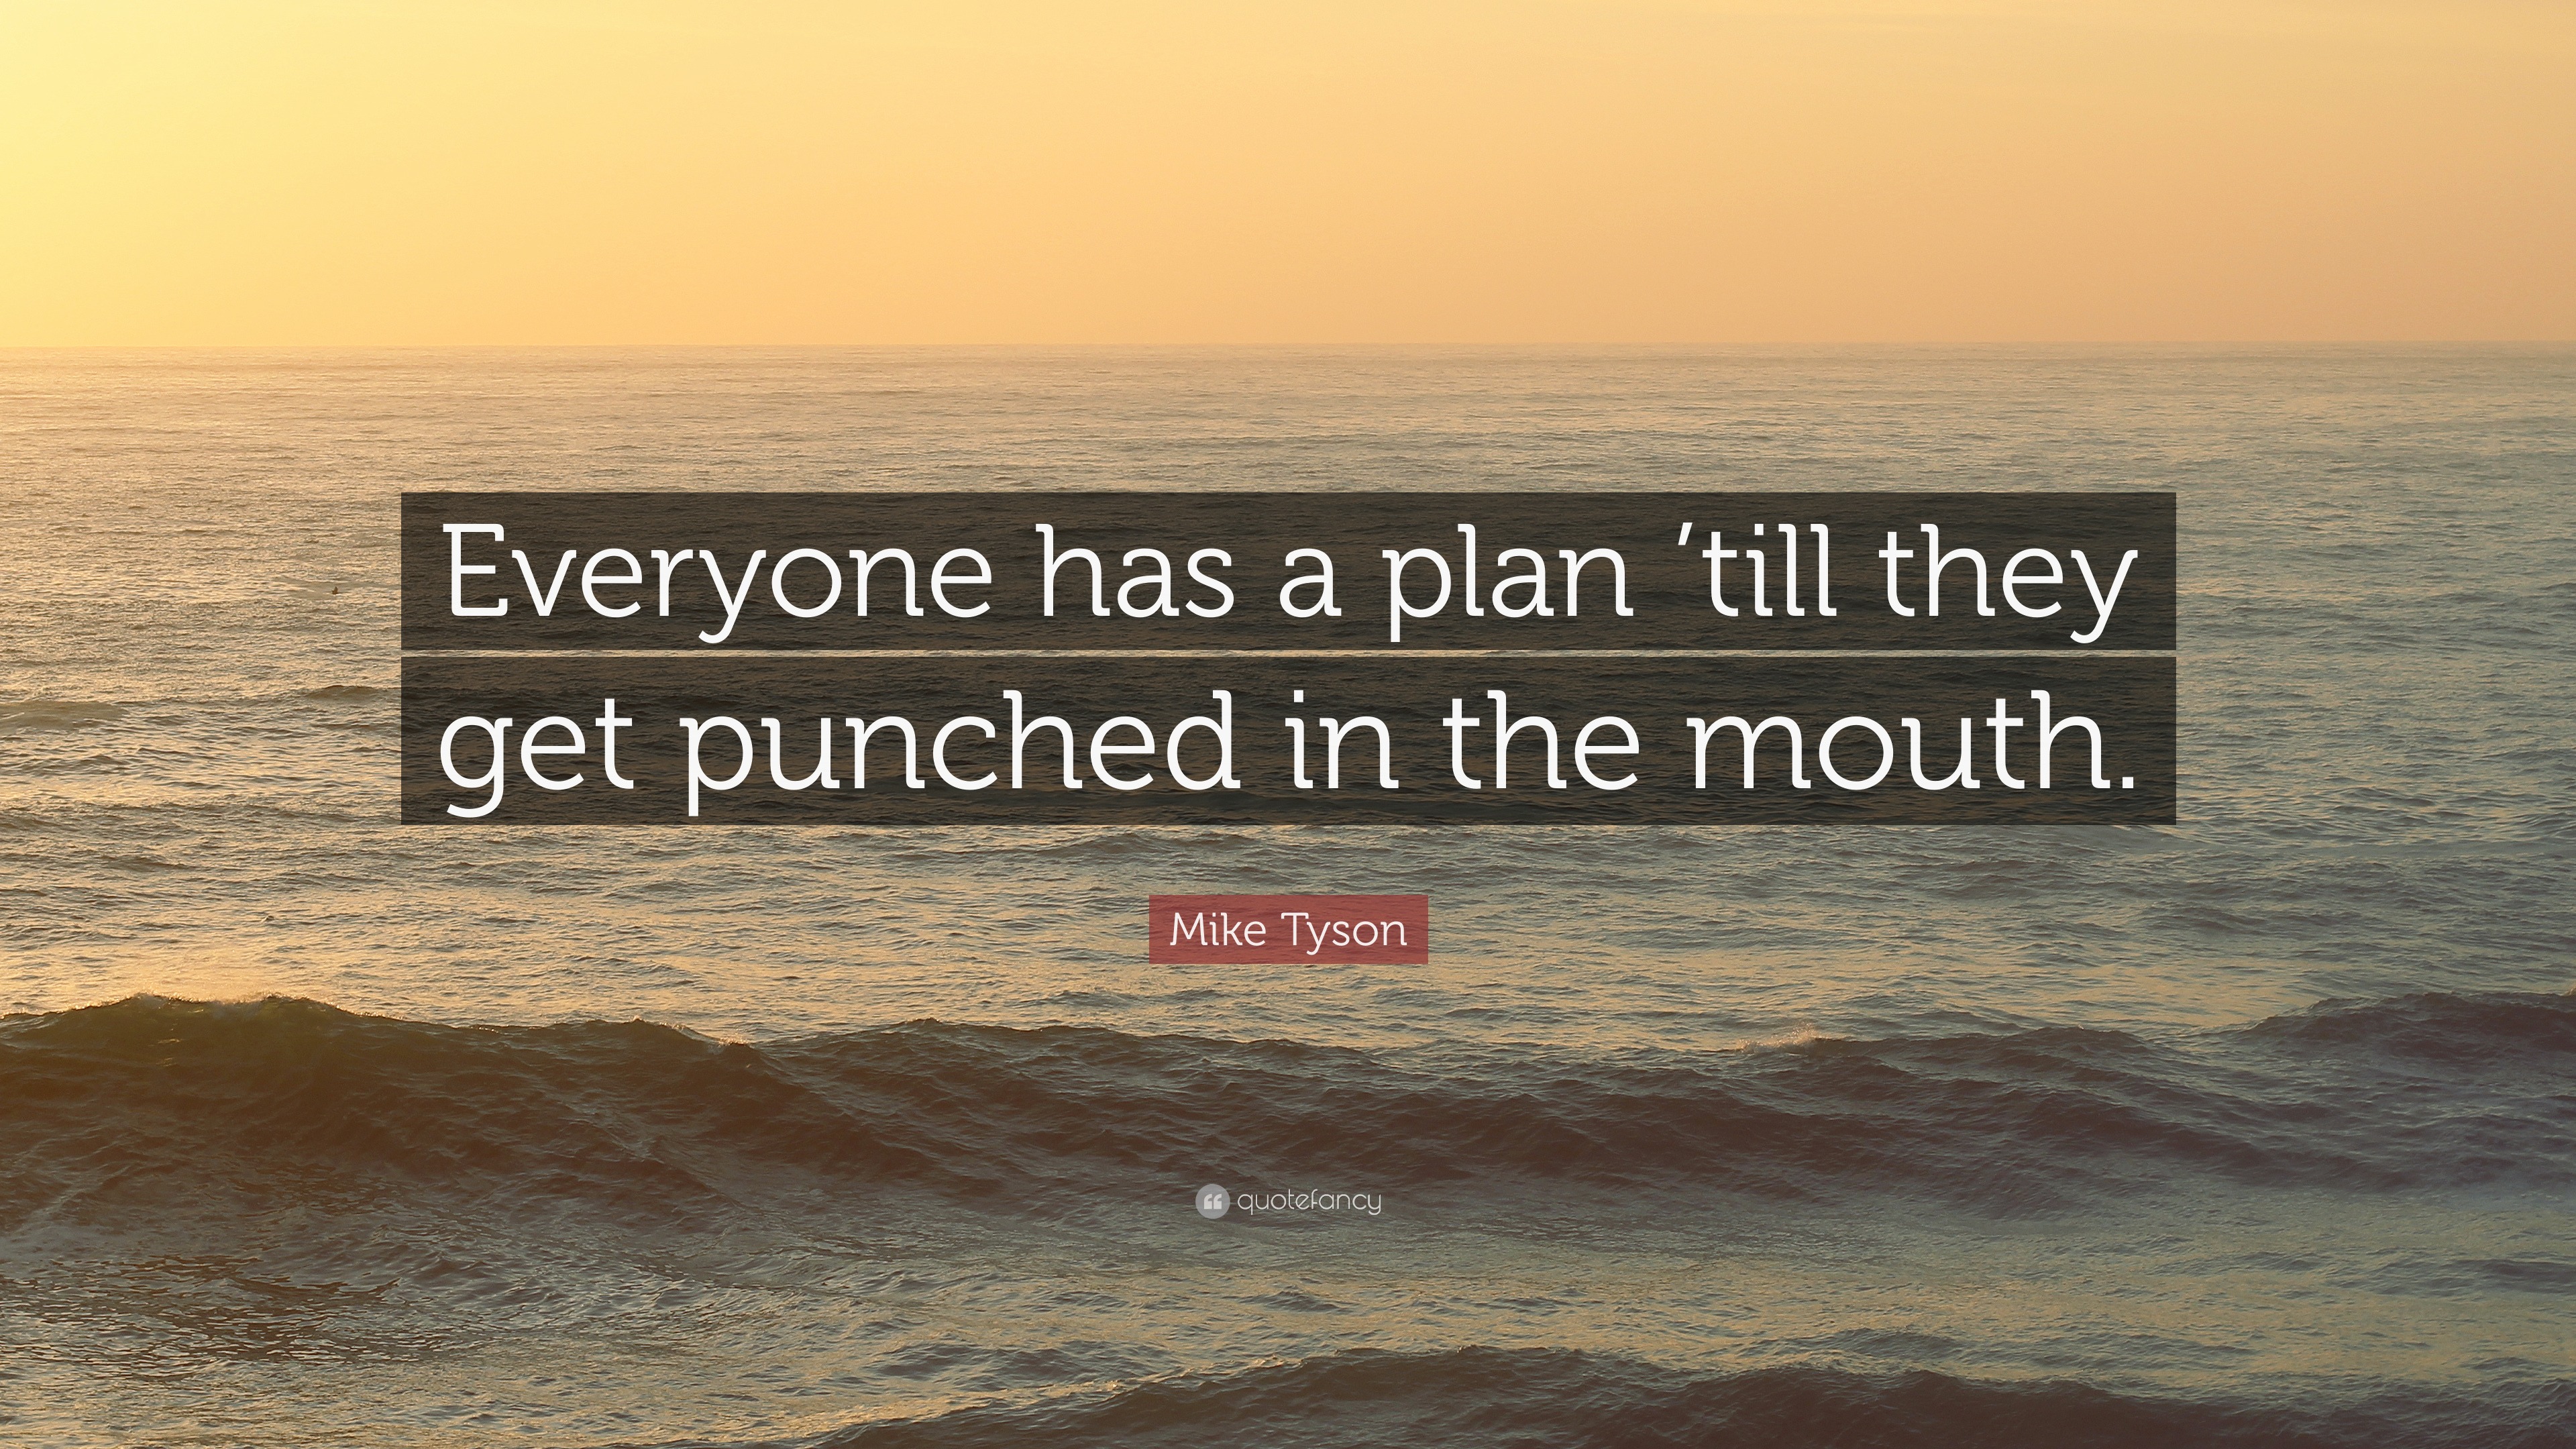 Mike Tyson Quote Everyone Has A Plan Till They Get Punched In The Mouth